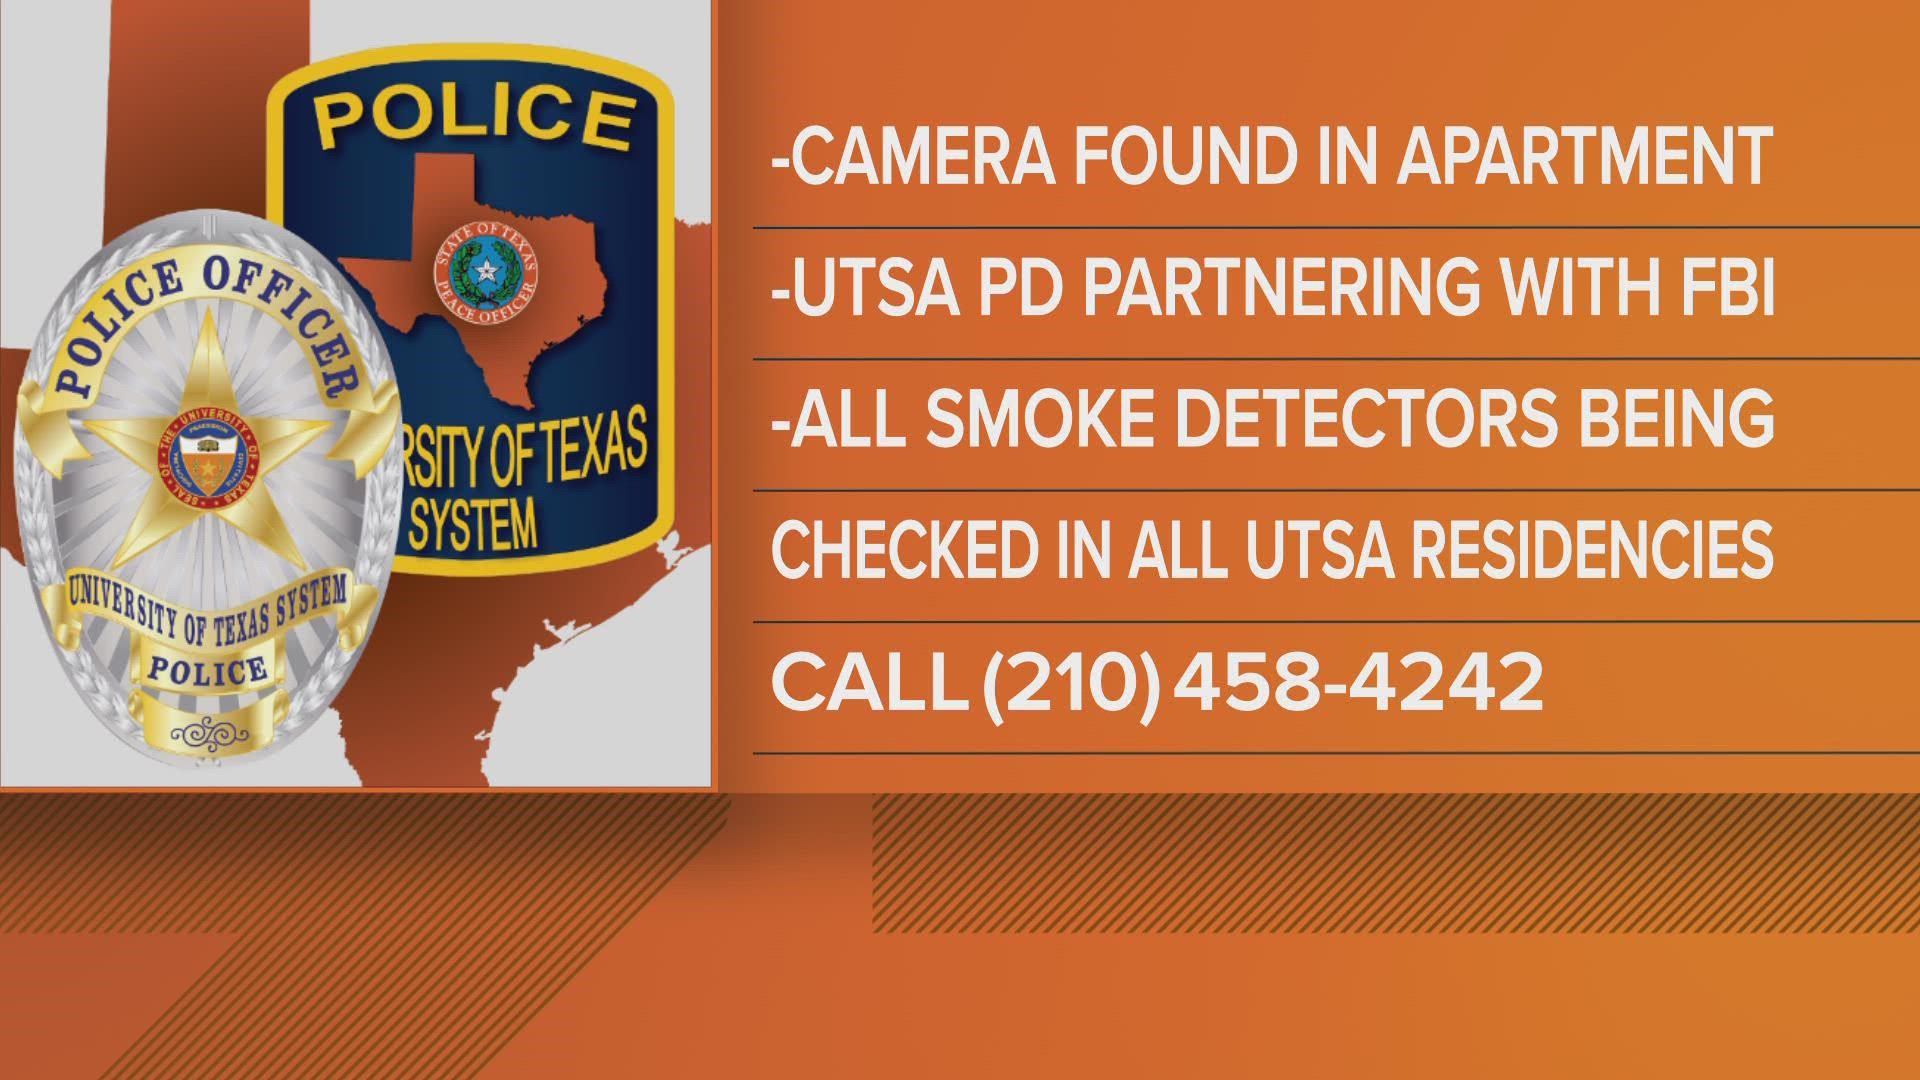 A new crime alert was issued by UTSA police after a hidden camera was found in an apartment near the campus this week.